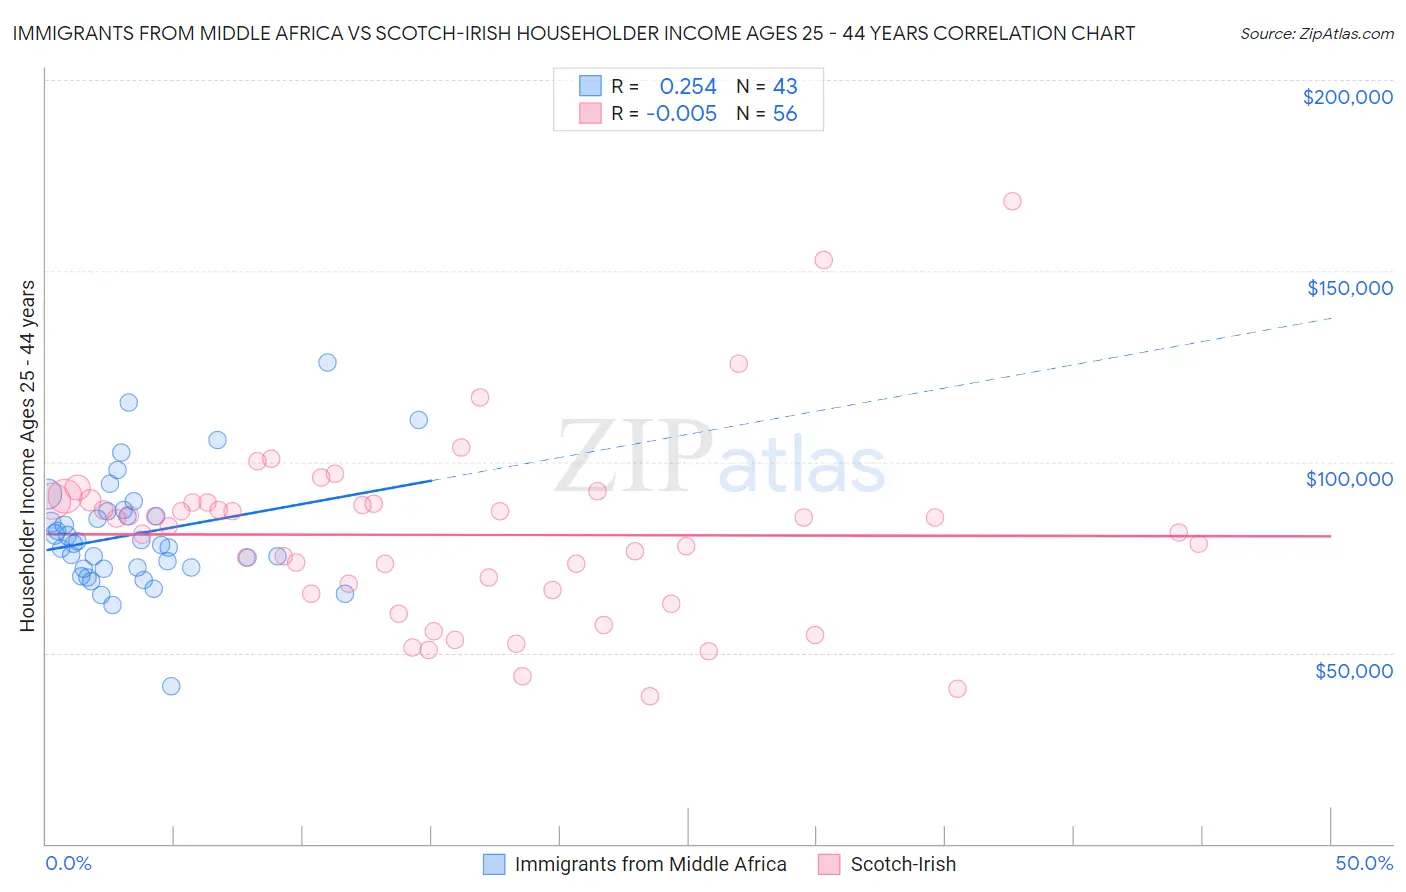 Immigrants from Middle Africa vs Scotch-Irish Householder Income Ages 25 - 44 years